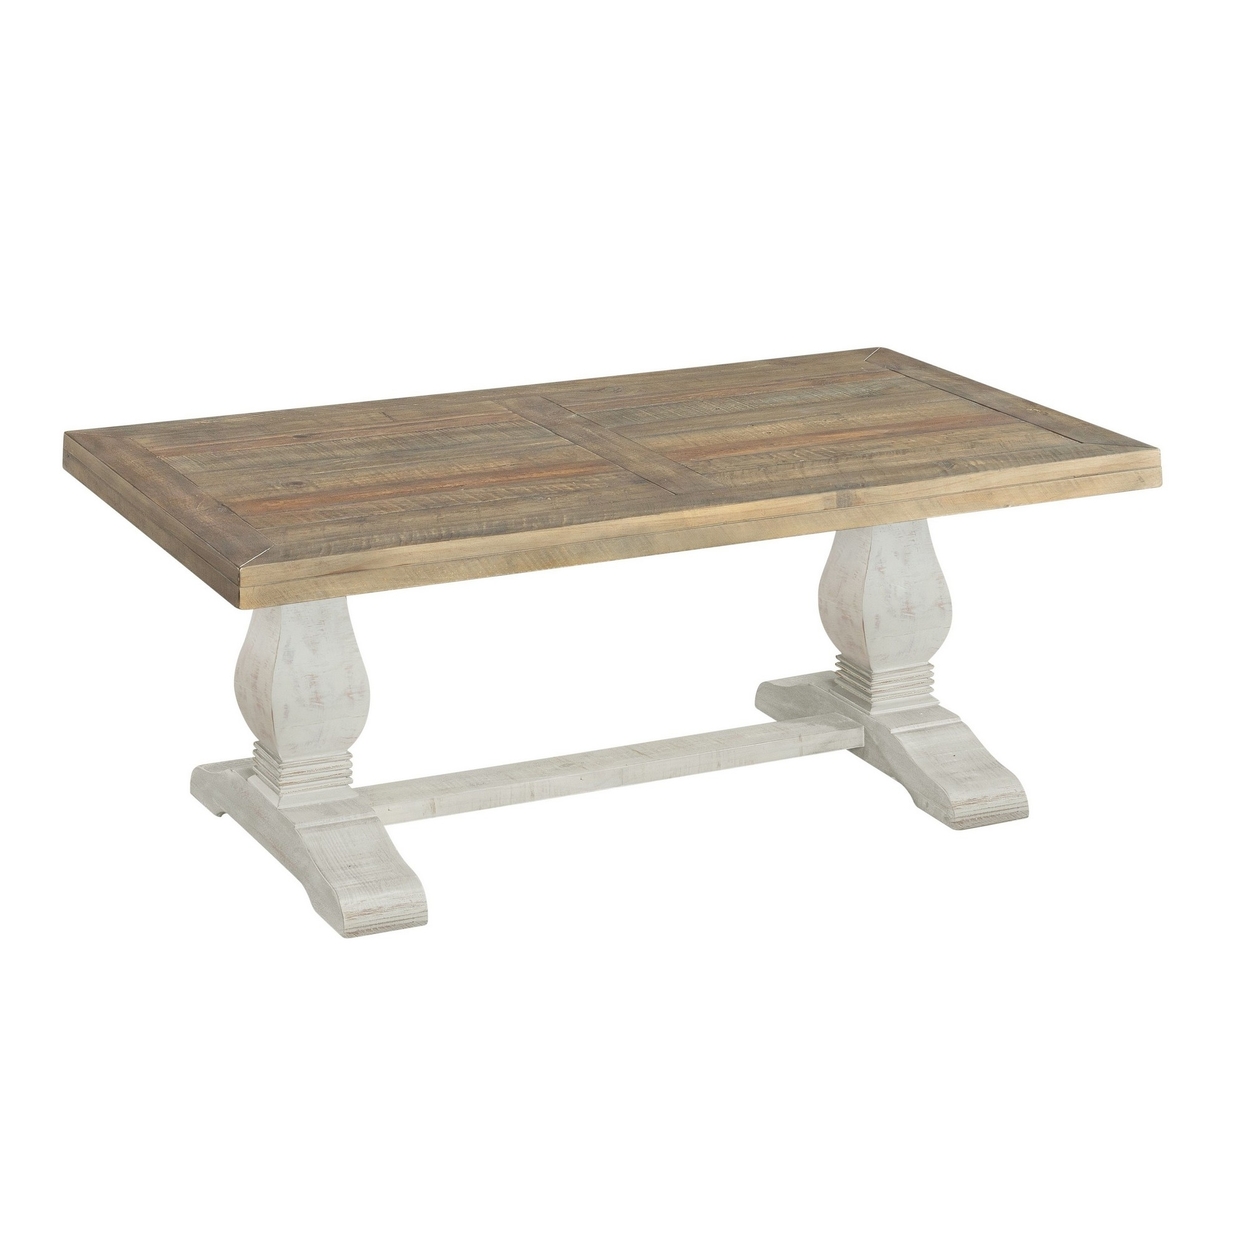 19 Inch Coffee Table With Pedestal Base, Brown And White- Saltoro Sherpi